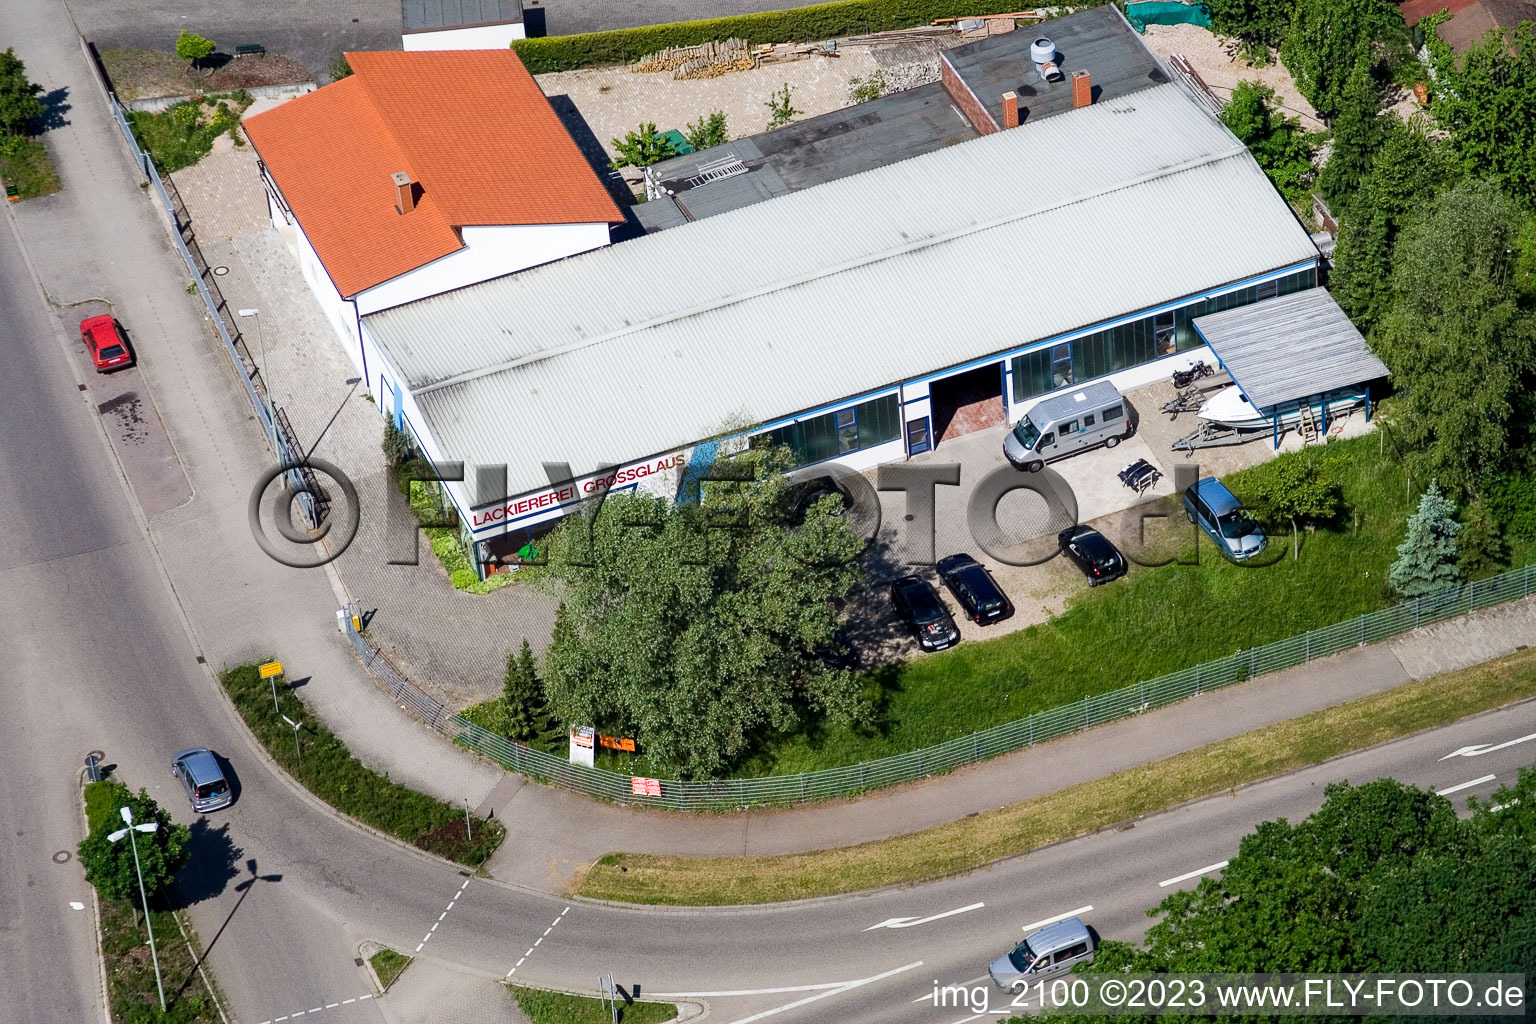 Aerial view of Gross car paint shop in the district Minderslachen in Kandel in the state Rhineland-Palatinate, Germany